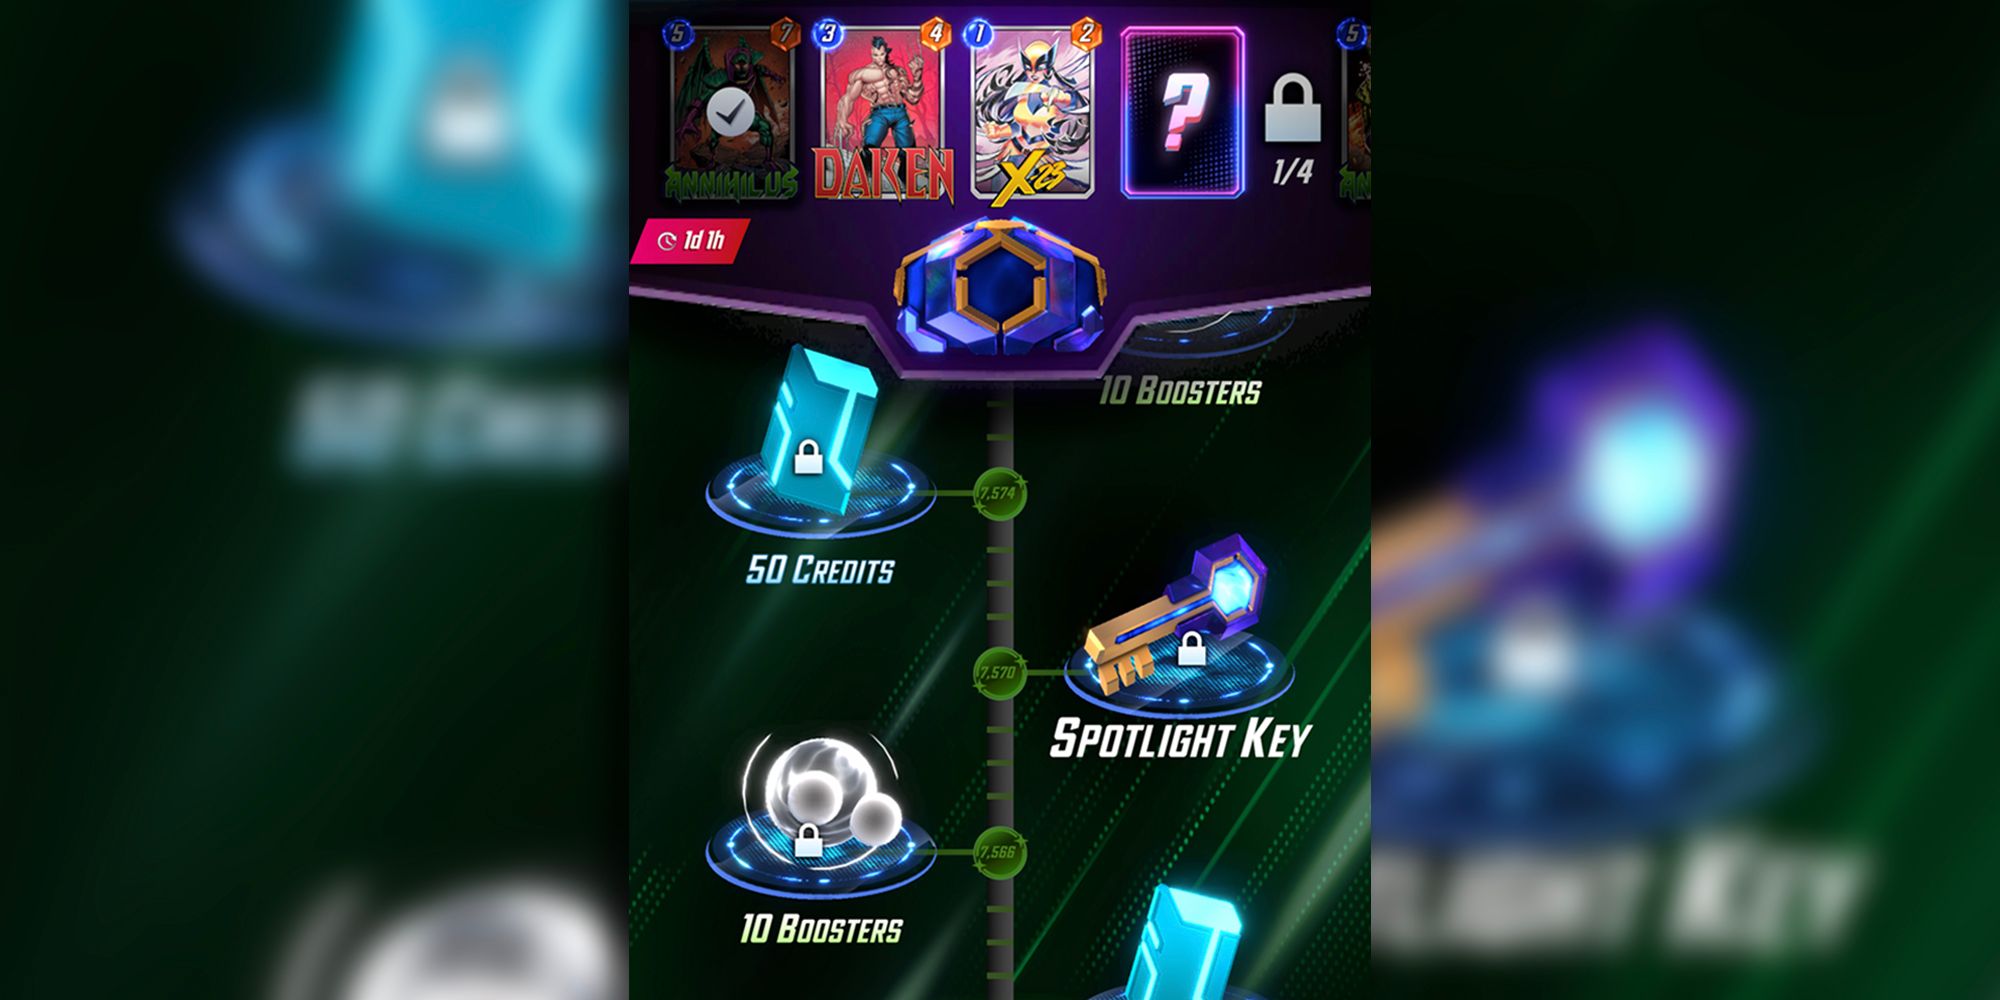 rewards for collection level including spotlight key, and the weekly cards in the spotlight cache